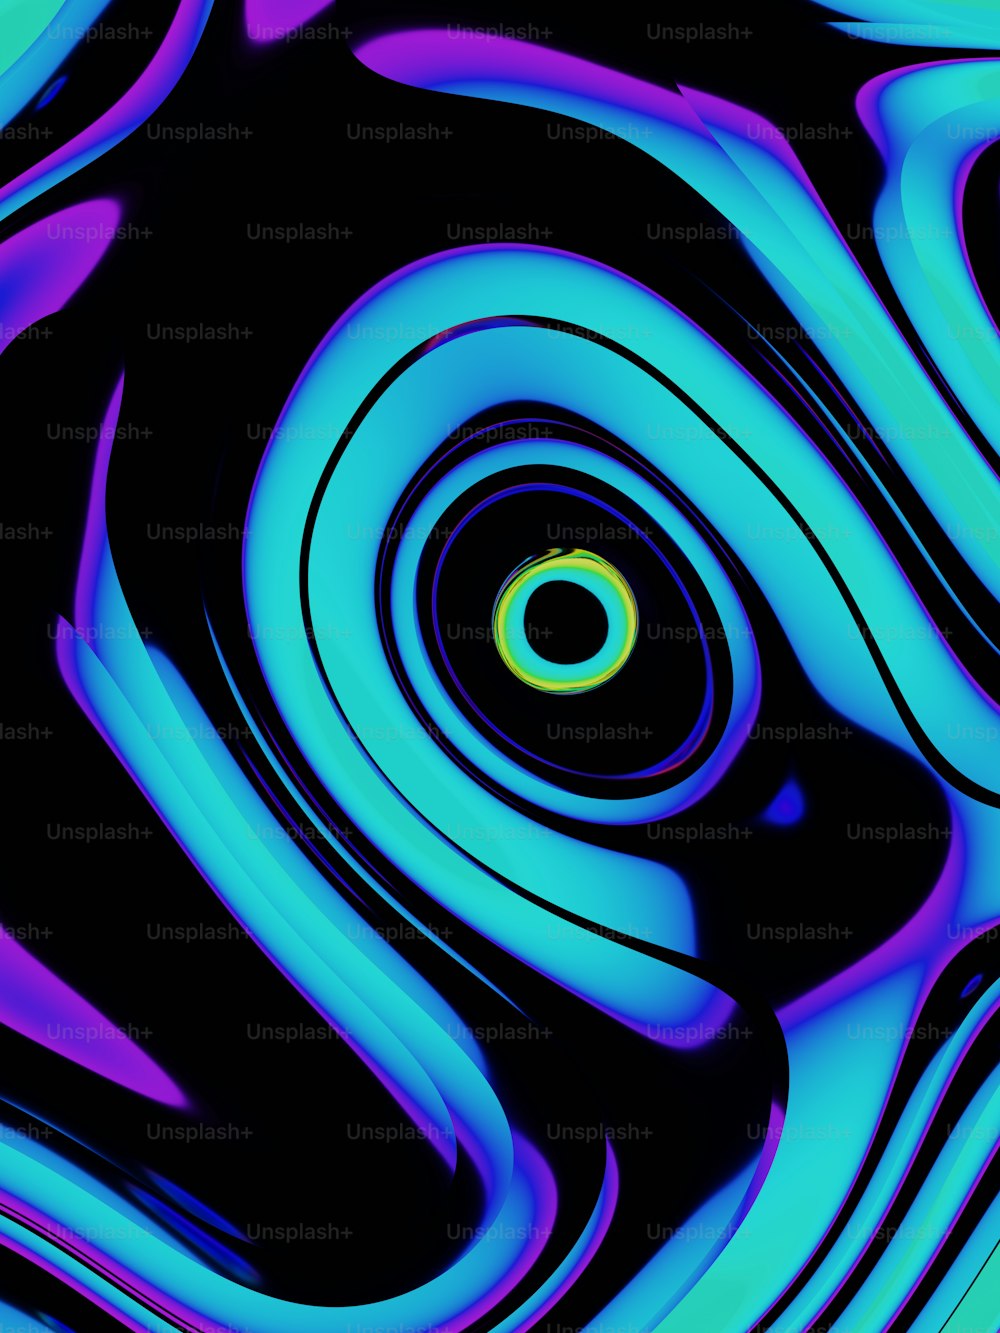 a black background with blue and purple swirls